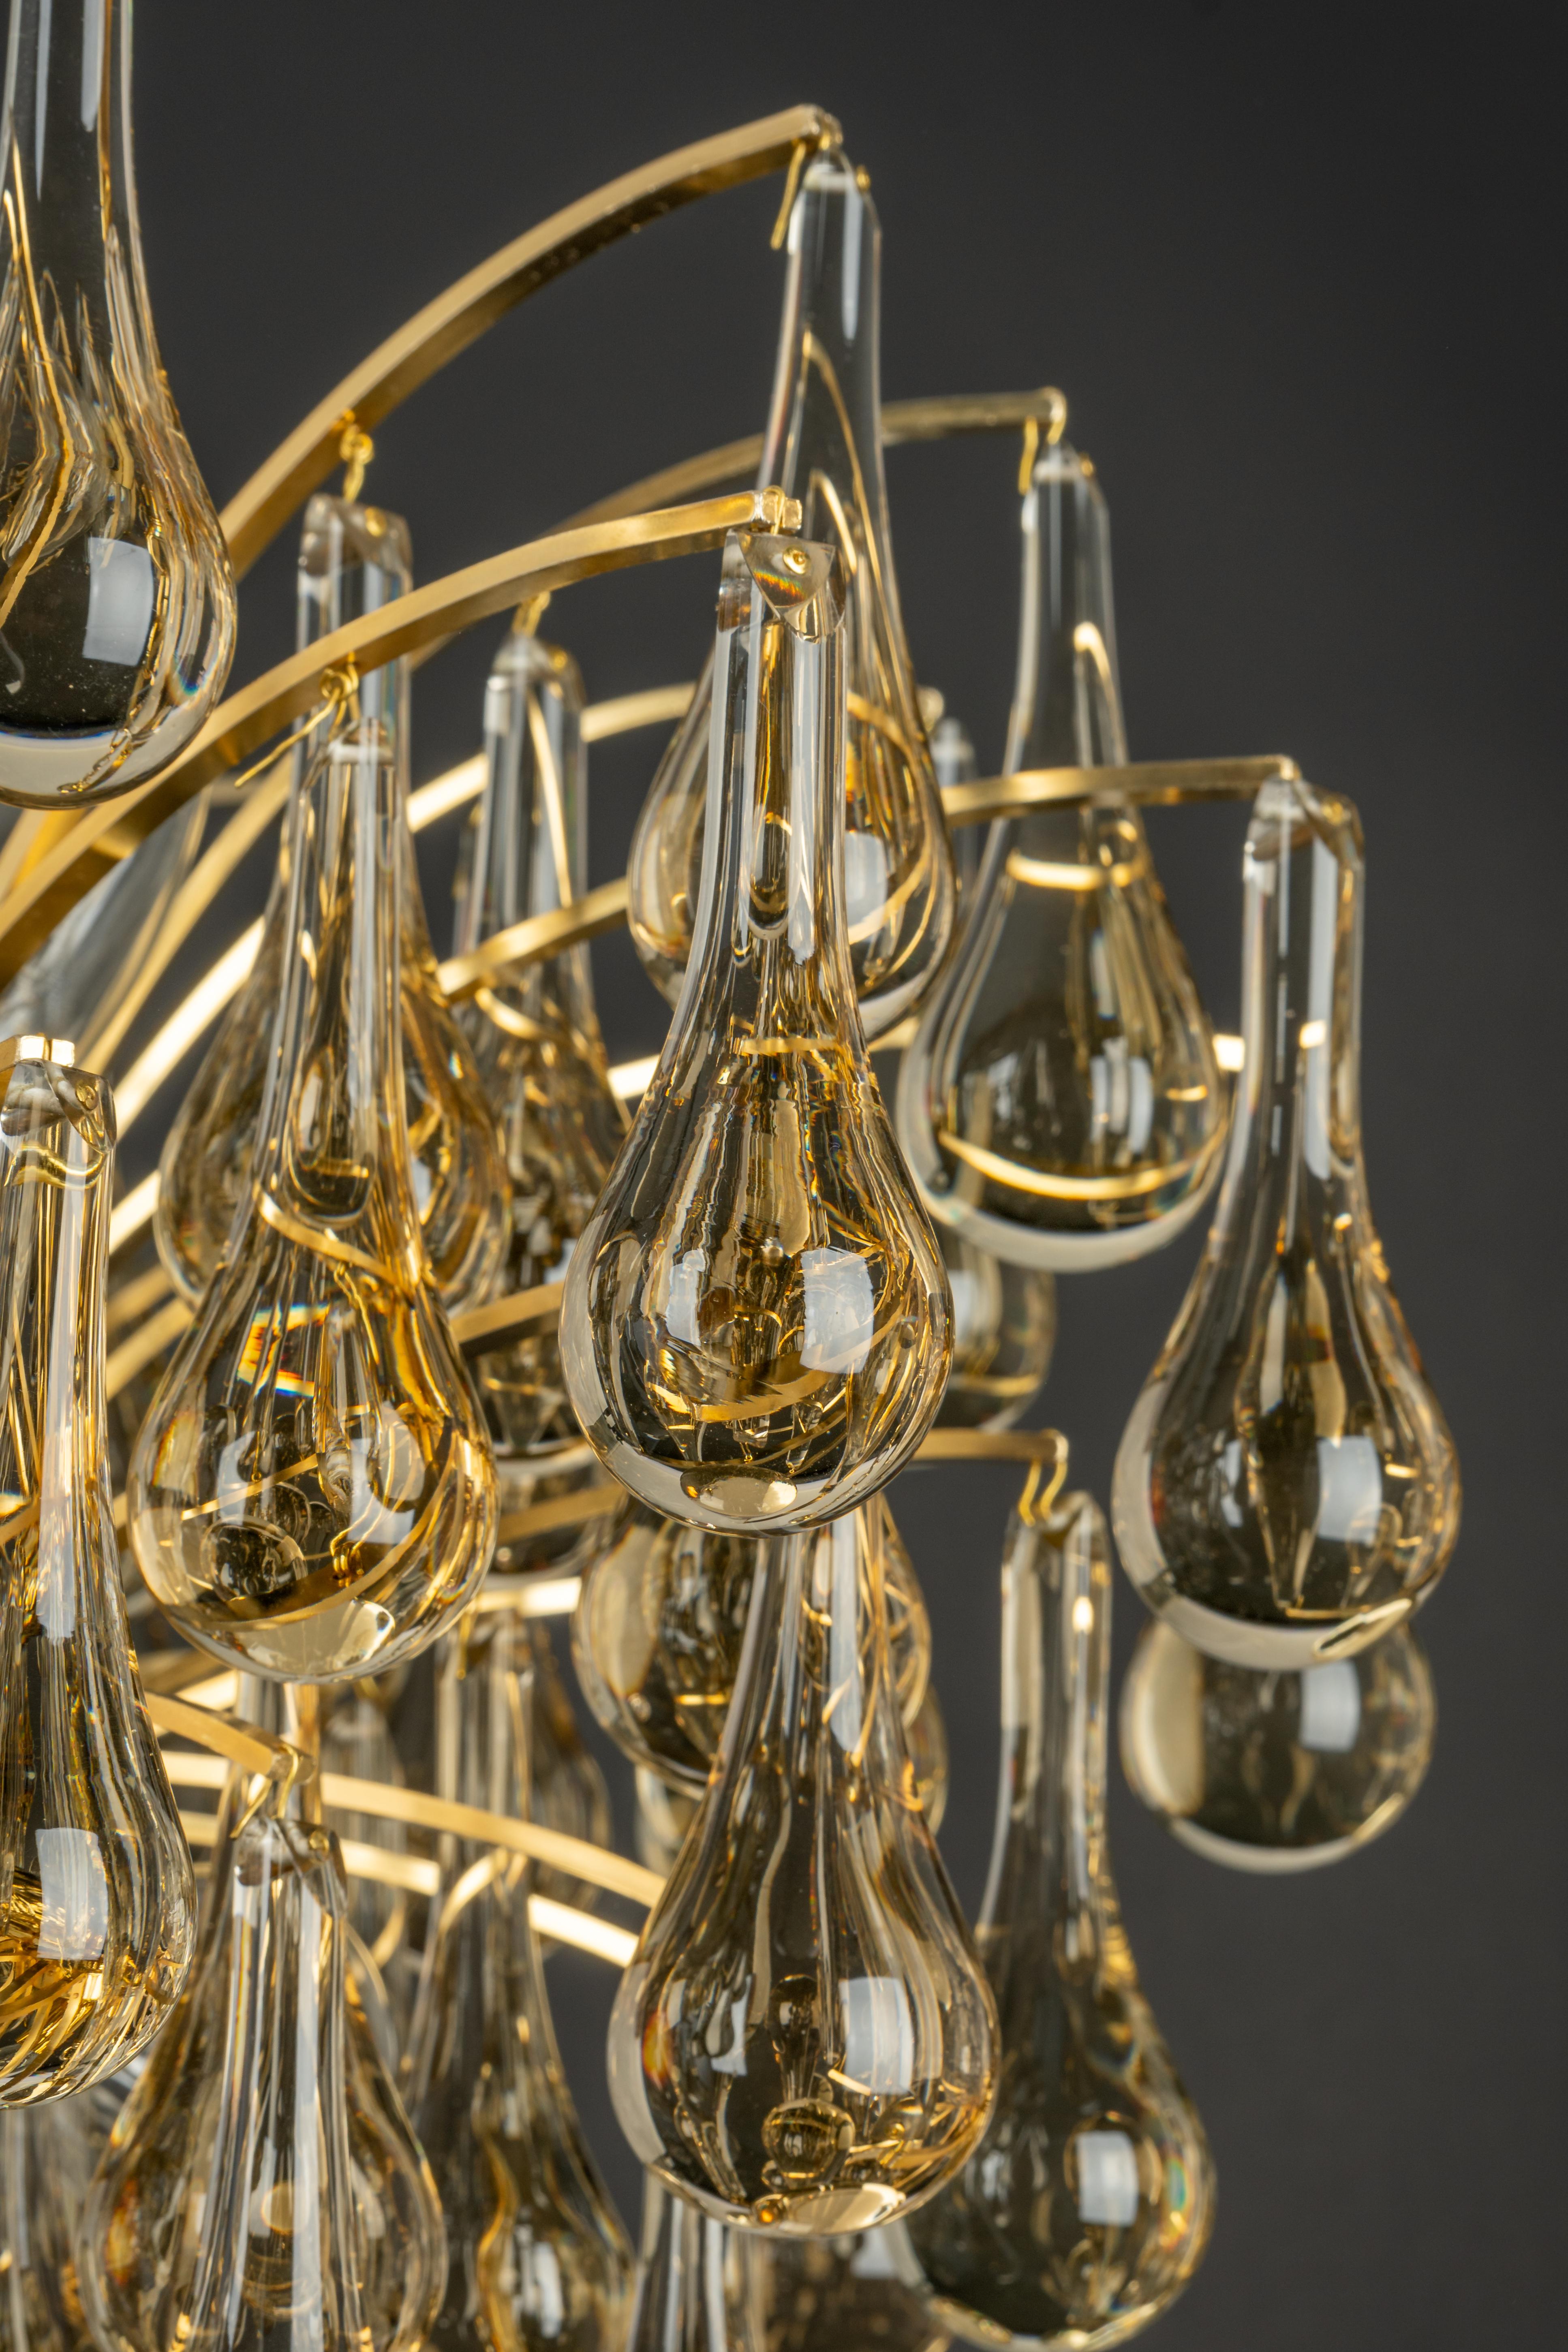 Large Murano Glass Tear Drop Chandelier, Christoph Palme, Germany, 1970s For Sale 7